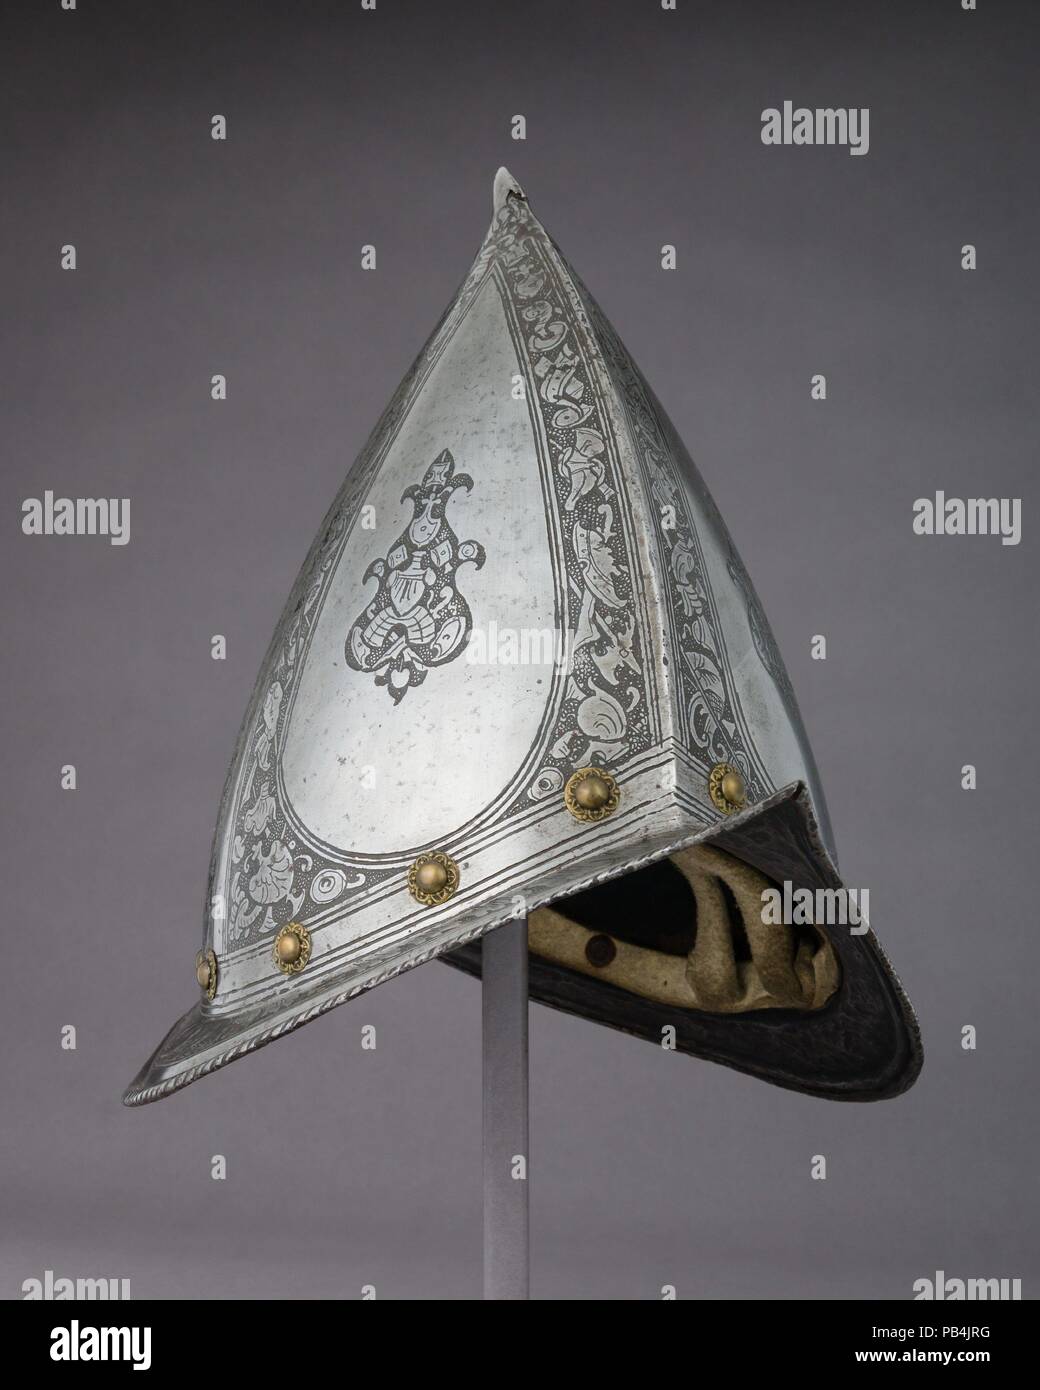 Morion-Cabasset. Culture: Italian. Dimensions: H. 11 5/8 in. (29.5 cm); W. 9 1/16 in. (23 cm); D. 13 11/16 in. (34.8 cm); Wt. 2 lb. 10 oz. (1192 g). Date: ca. 1575. Museum: Metropolitan Museum of Art, New York, USA. Stock Photo